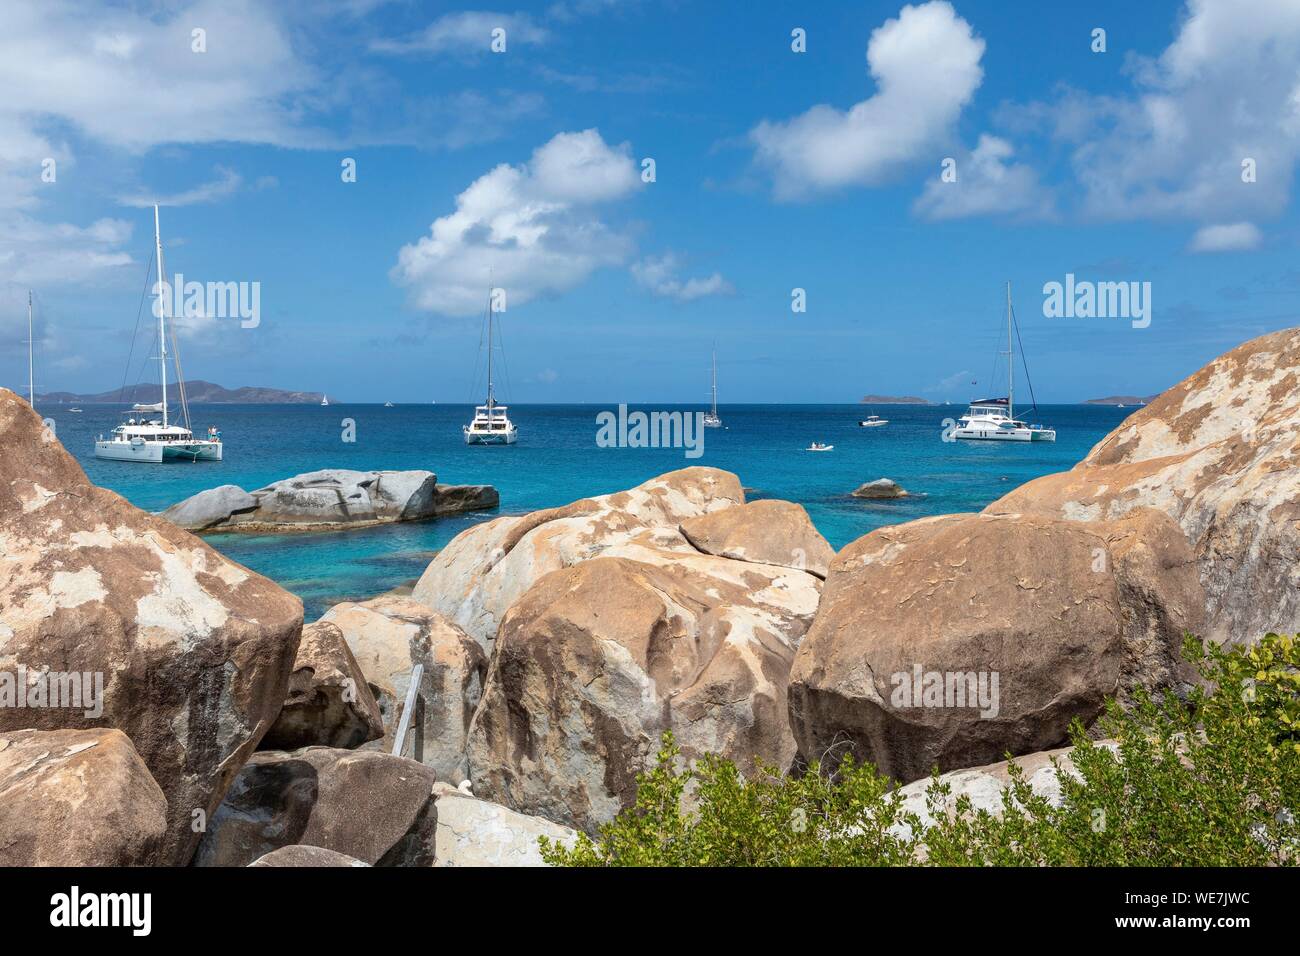 West Indies, British Virgin Islands, Virgin Gorda Island, The Baths, view of the bathing beach, sailboats and motor boat at anchor, in the foreground the typical rocks that surround the paradisiacal swimming area Stock Photo